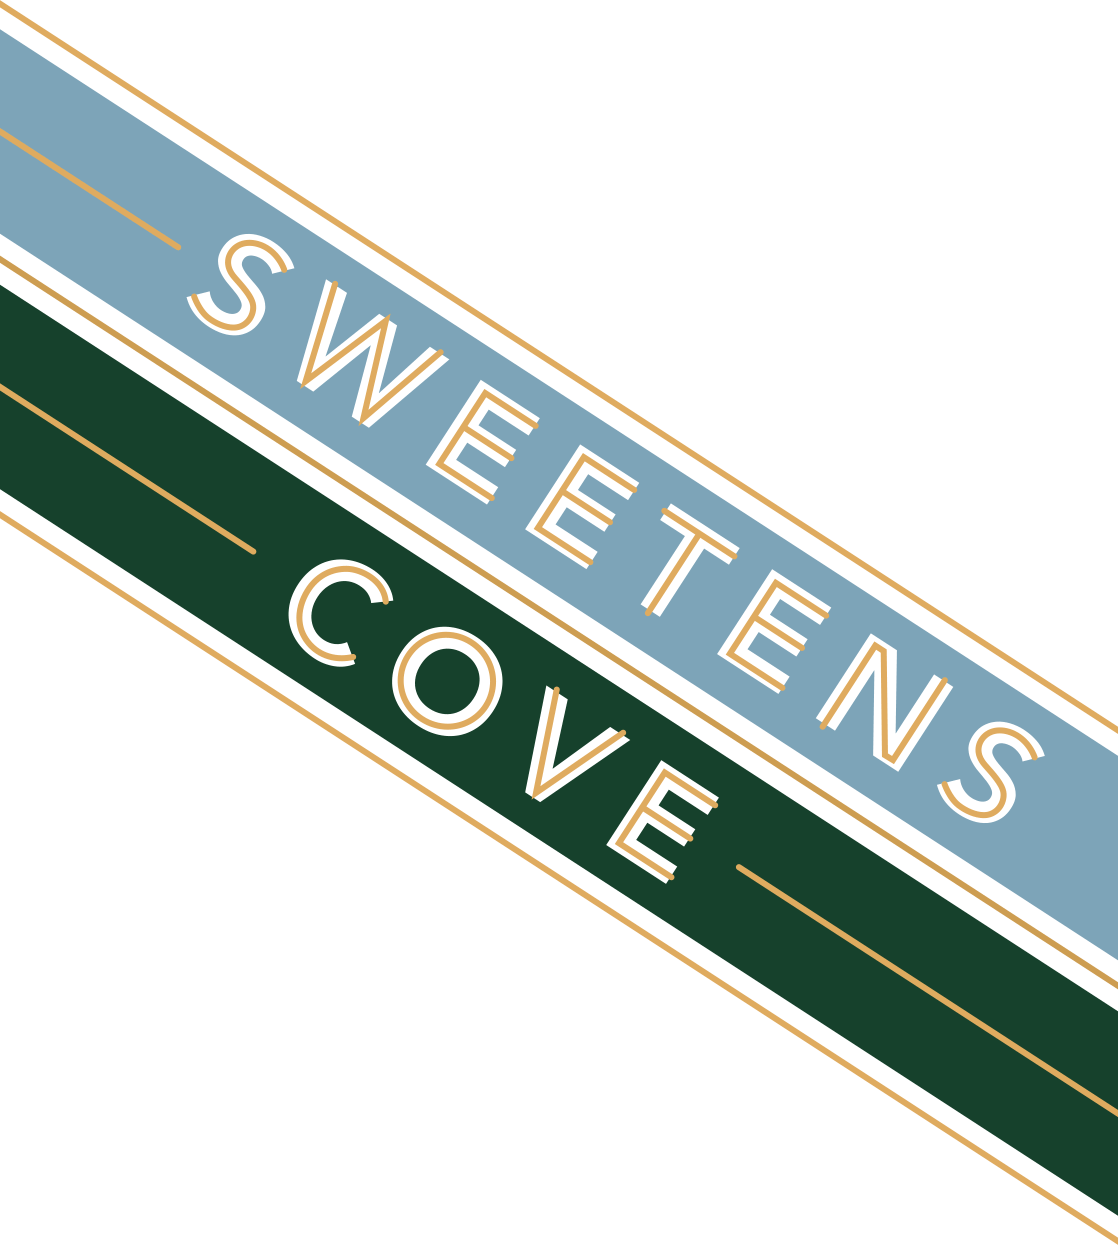 Sweetens Cove Tennessee Bourbon Whiskey Identity Design